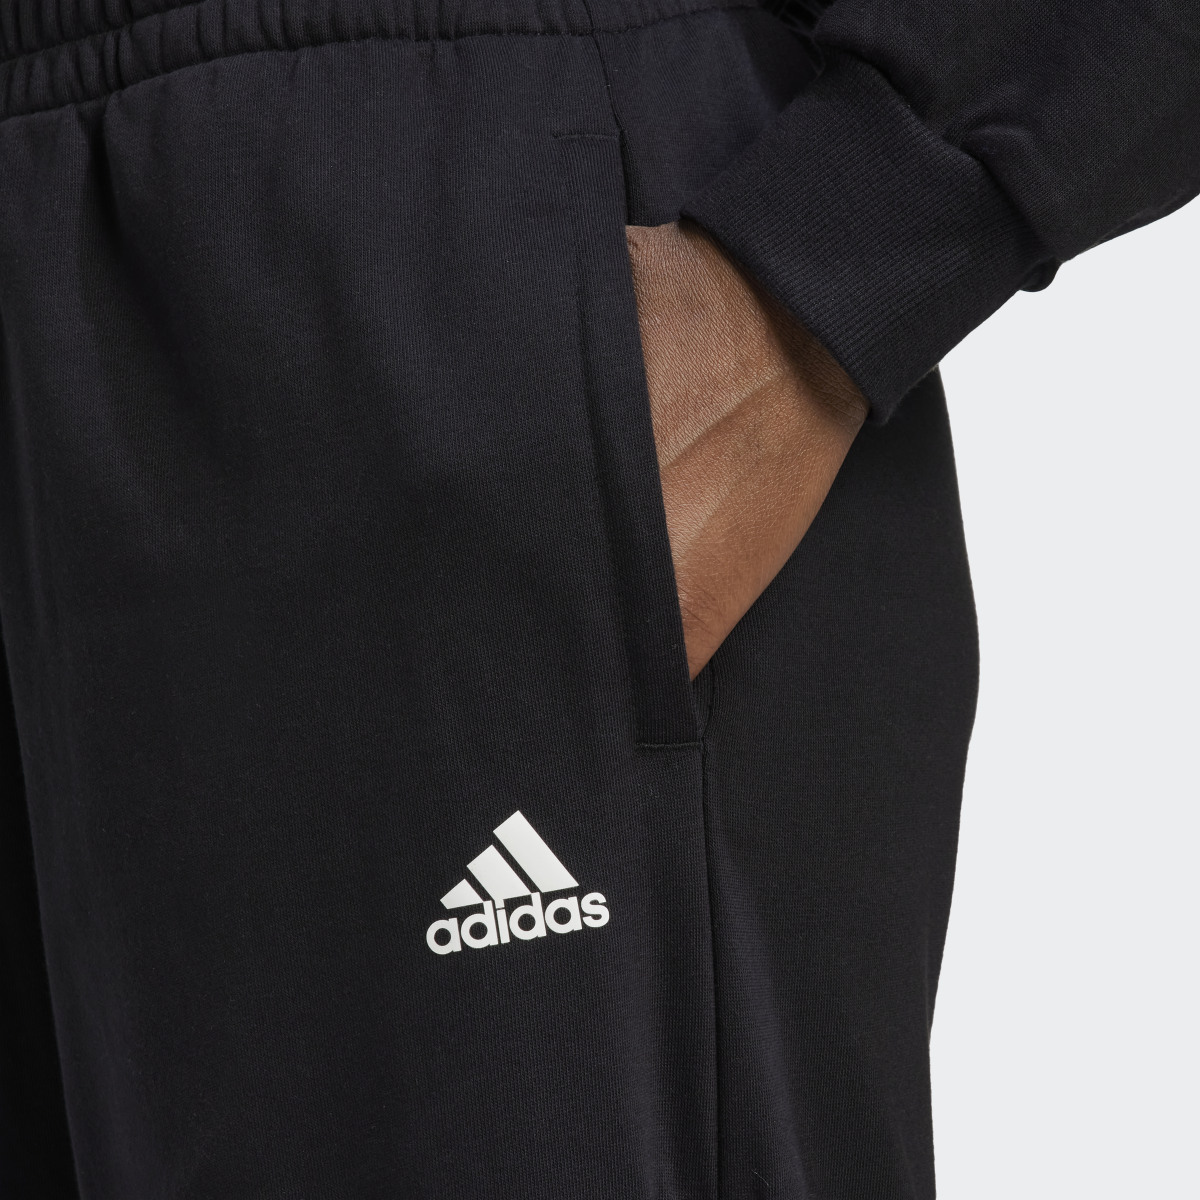 Adidas Hyperglam 3-Stripes Oversized Cuffed Joggers with Side Zippers. 6